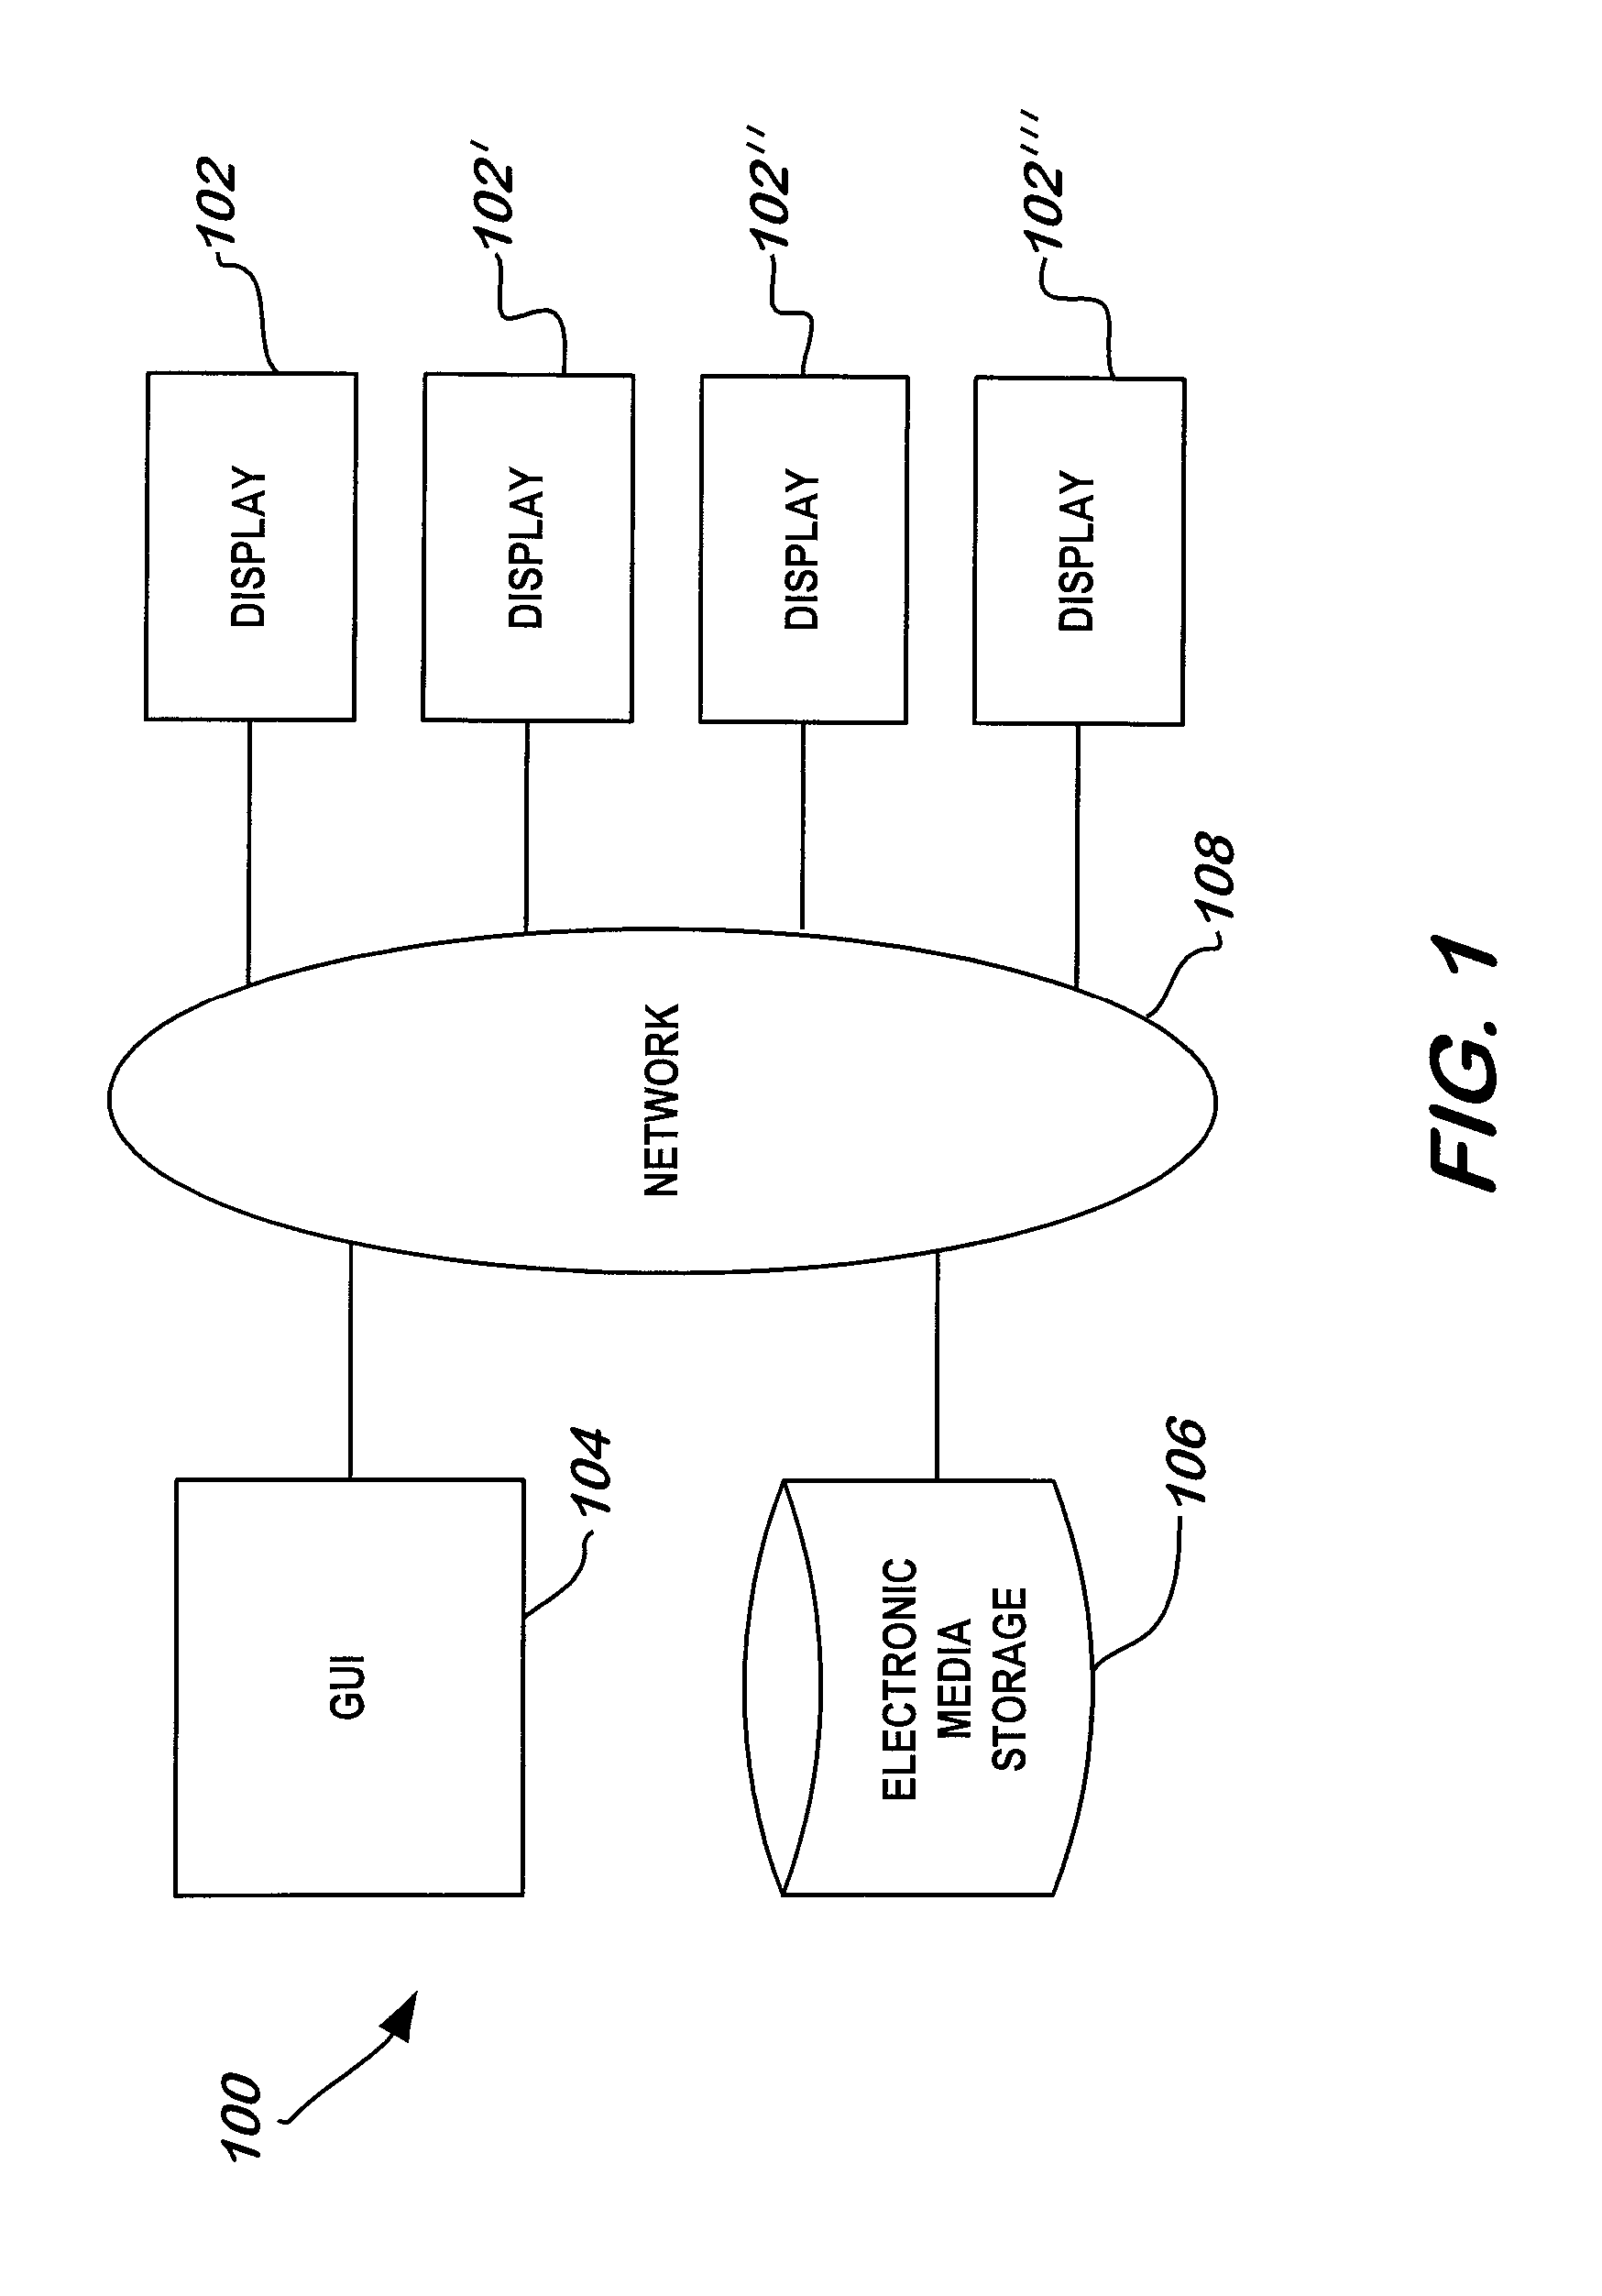 System and Method for Controlling the Distribution of Electronic Media